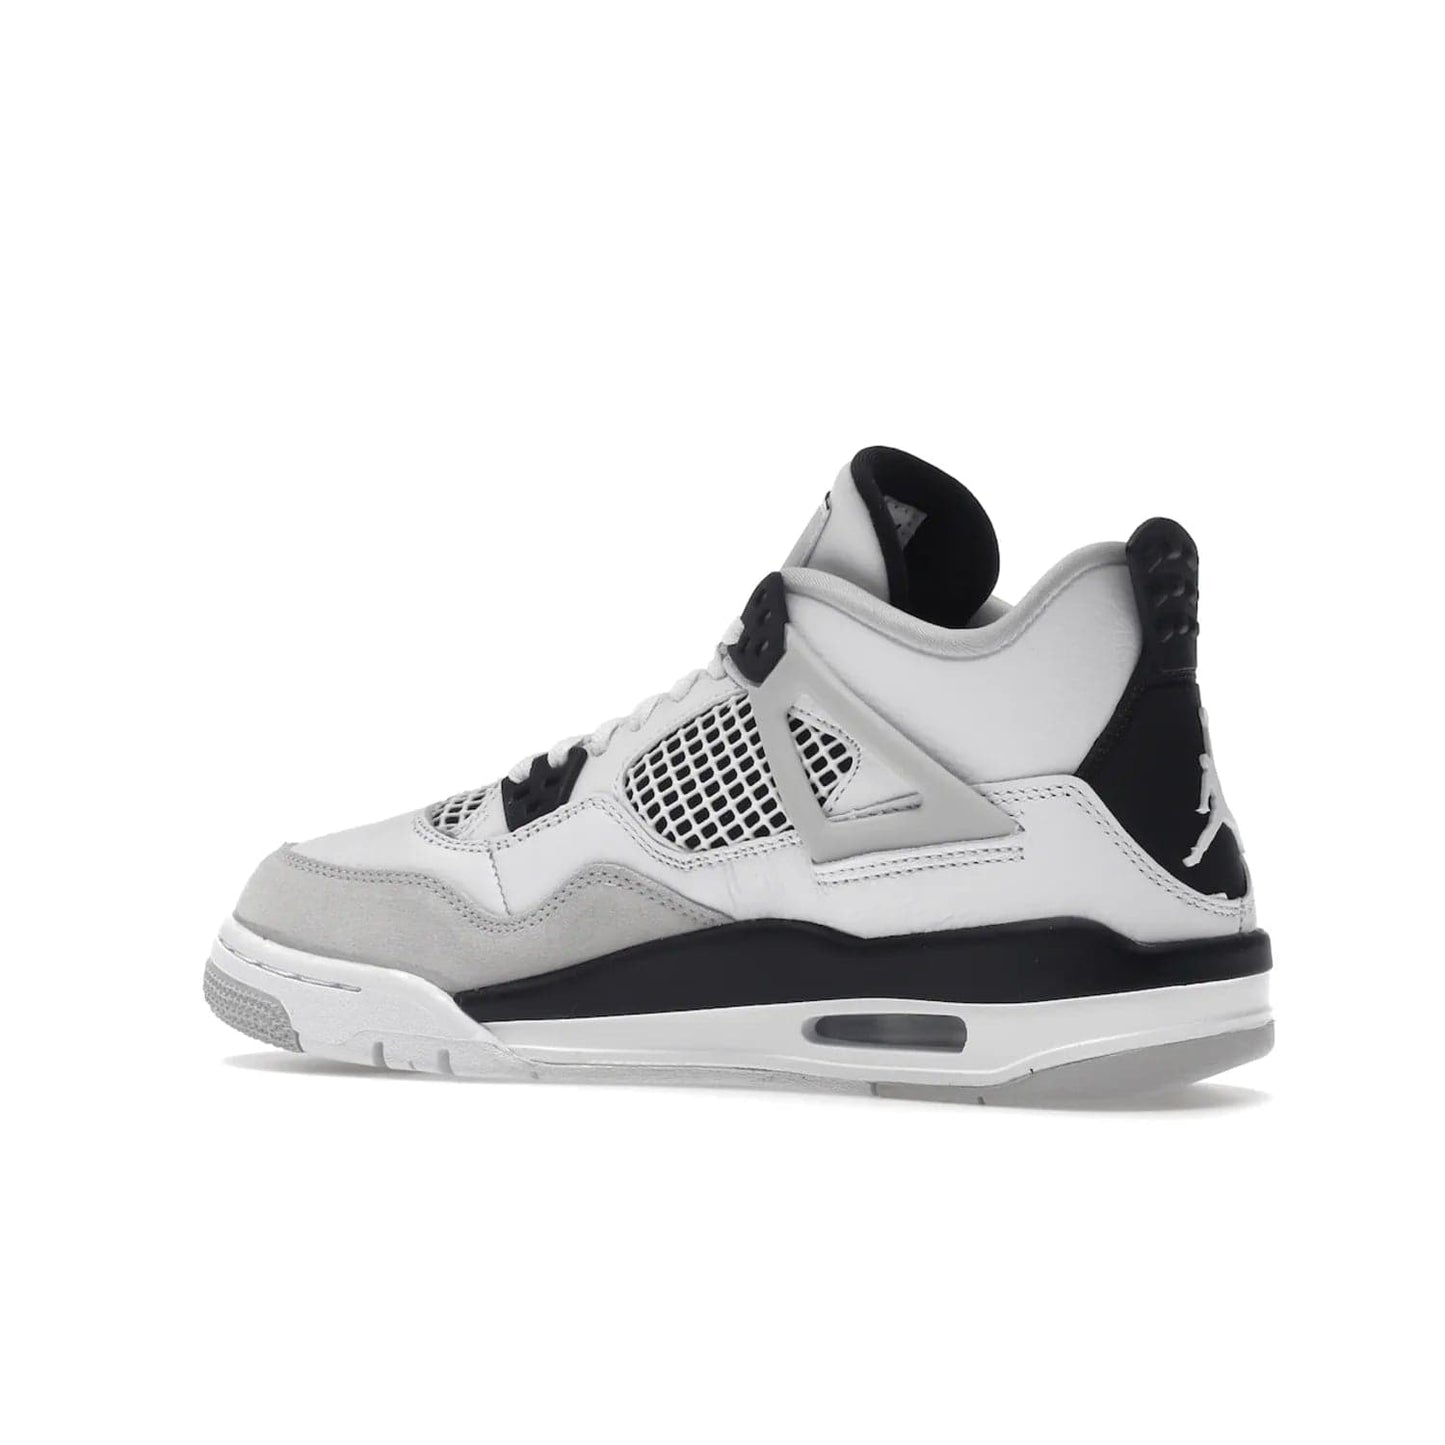 Jordan 4 Retro Military Black (GS) - Image 22 - Only at www.BallersClubKickz.com - A must-have for grade schoolers, the Air Jordan 4 Retro Military Black (GS) offers classic style with plenty of breathable support. Featuring a white sole and base with suede and leather overlays in subtle black and grey tones, the shoes are perfect for active pursuits and everyday comfort. Get an instant classic today!